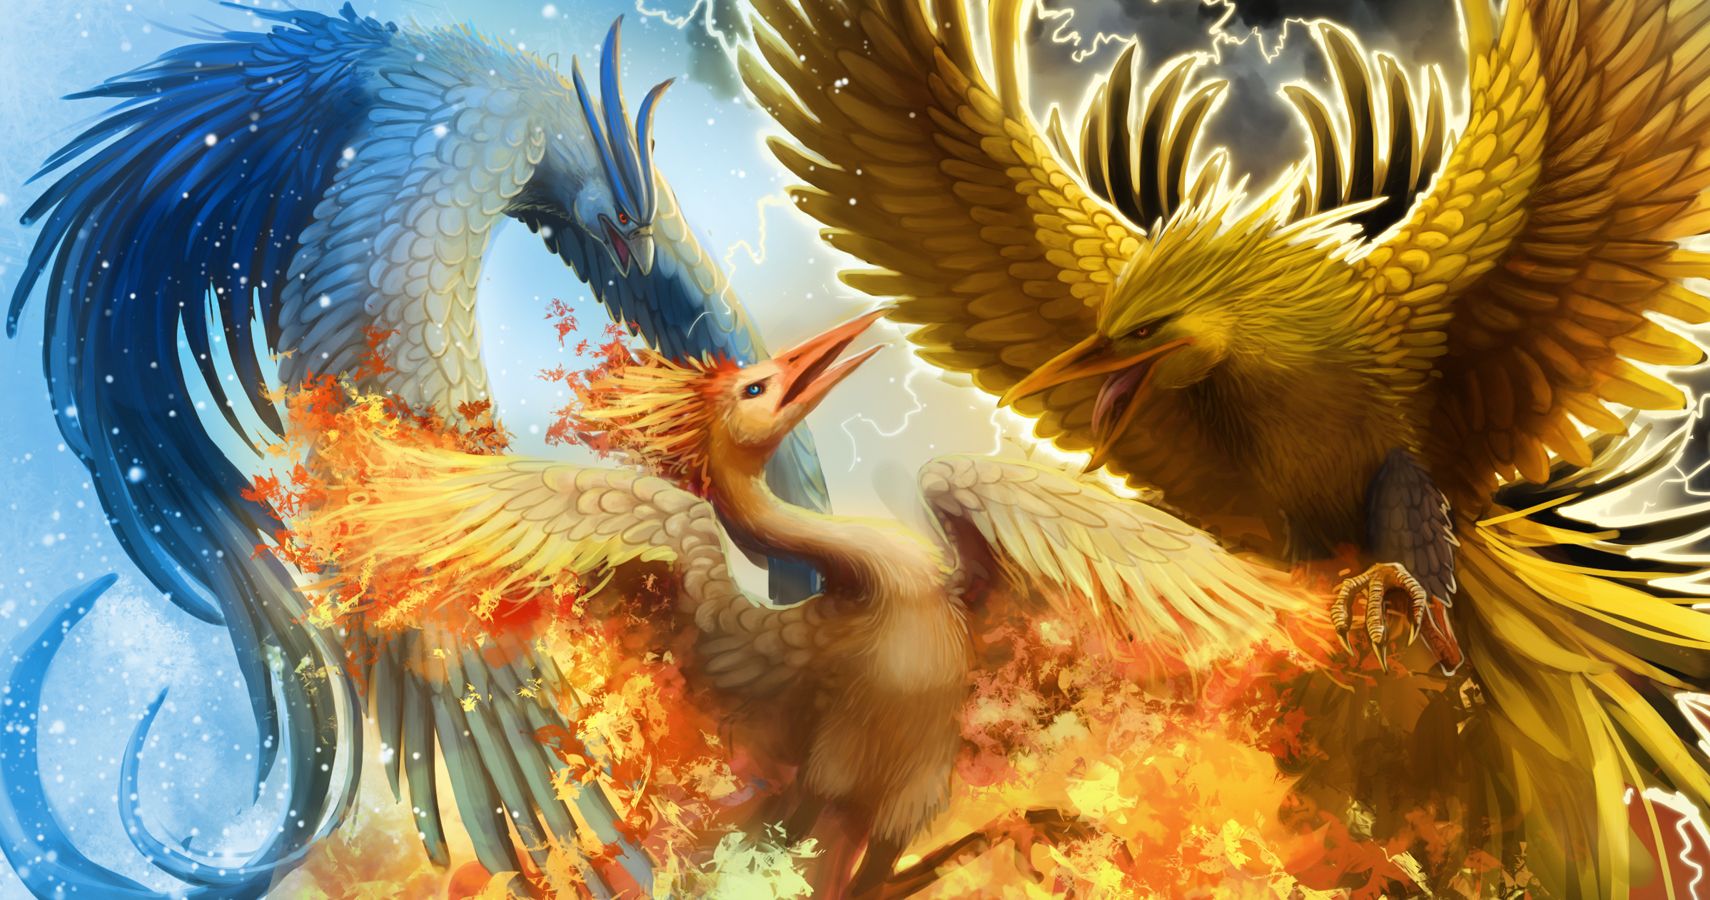 Lugia vs Ho-oh - Which legendary can beat Crystal the fastest